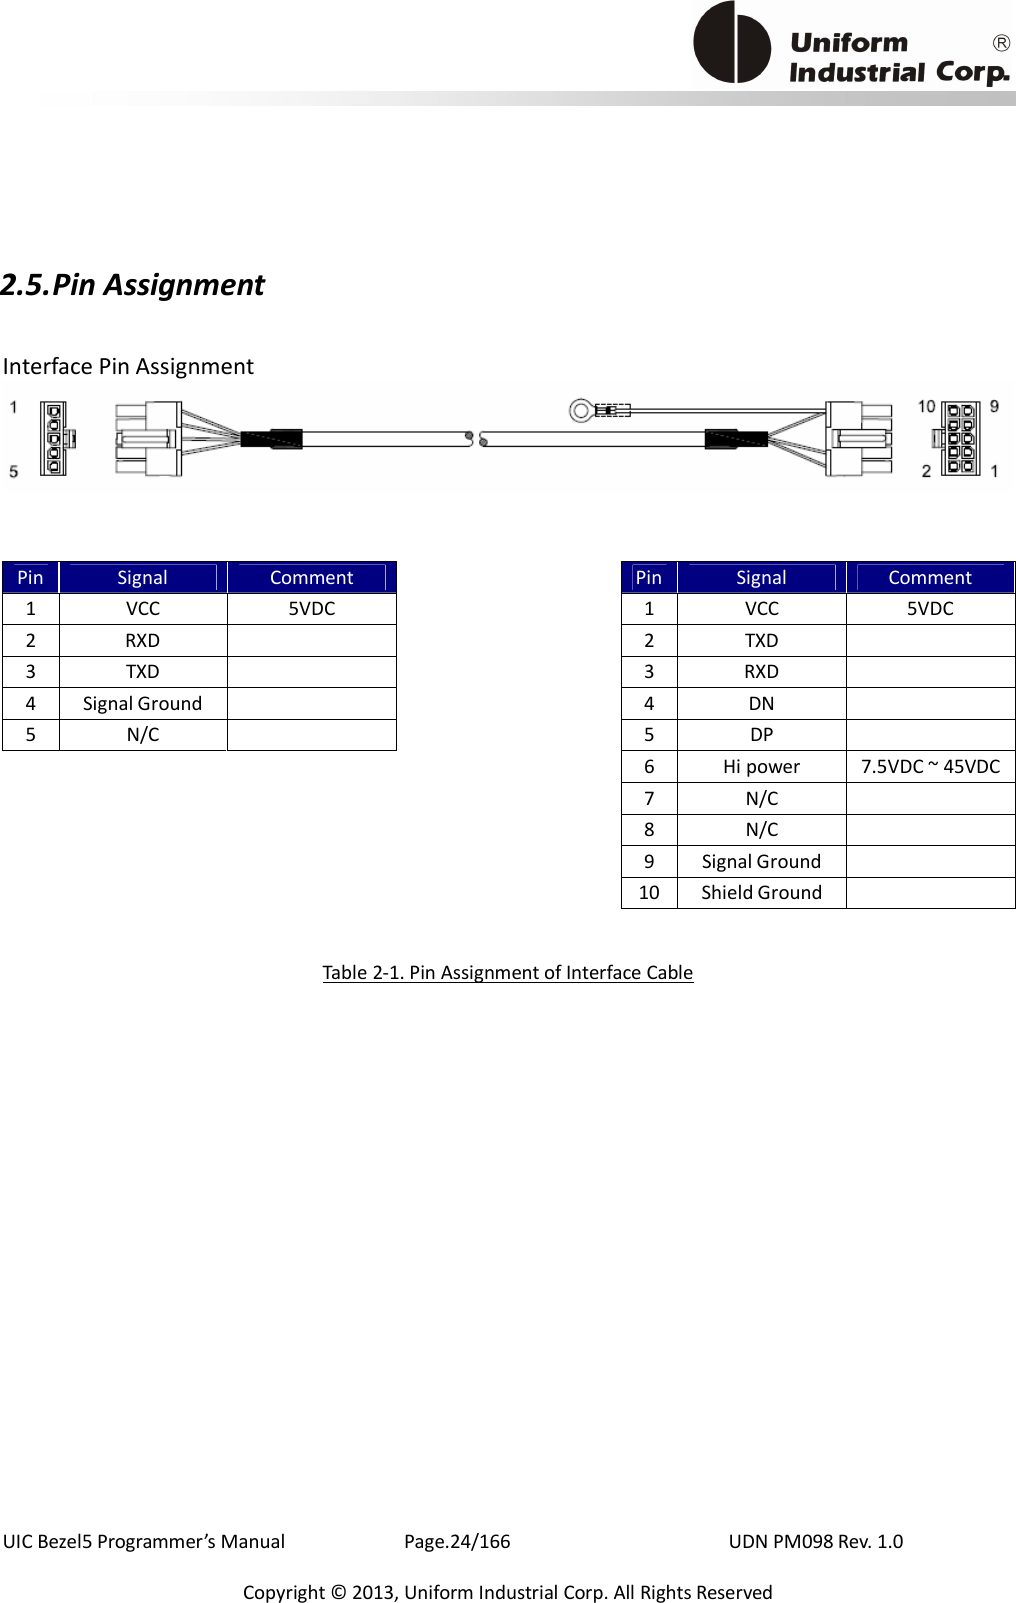                                           UIC Bezel5 Programmer’s Manual      Page.24/166                    UDN PM098 Rev. 1.0 Copyright © 2013, Uniform Industrial Corp. All Rights Reserved 2.5. Pin Assignment Interface Pin Assignment   Pin Signal  Comment   Pin Signal  Comment 1  VCC  5VDC   1  VCC  5VDC 2  RXD     2  TXD    3  TXD     3  RXD    4  Signal Ground    4  DN    5  N/C    5  DP            6  Hi power  7.5VDC ~ 45VDC         7  N/C            8  N/C            9  Signal Ground            10 Shield Ground     Table 2-1. Pin Assignment of Interface Cable 